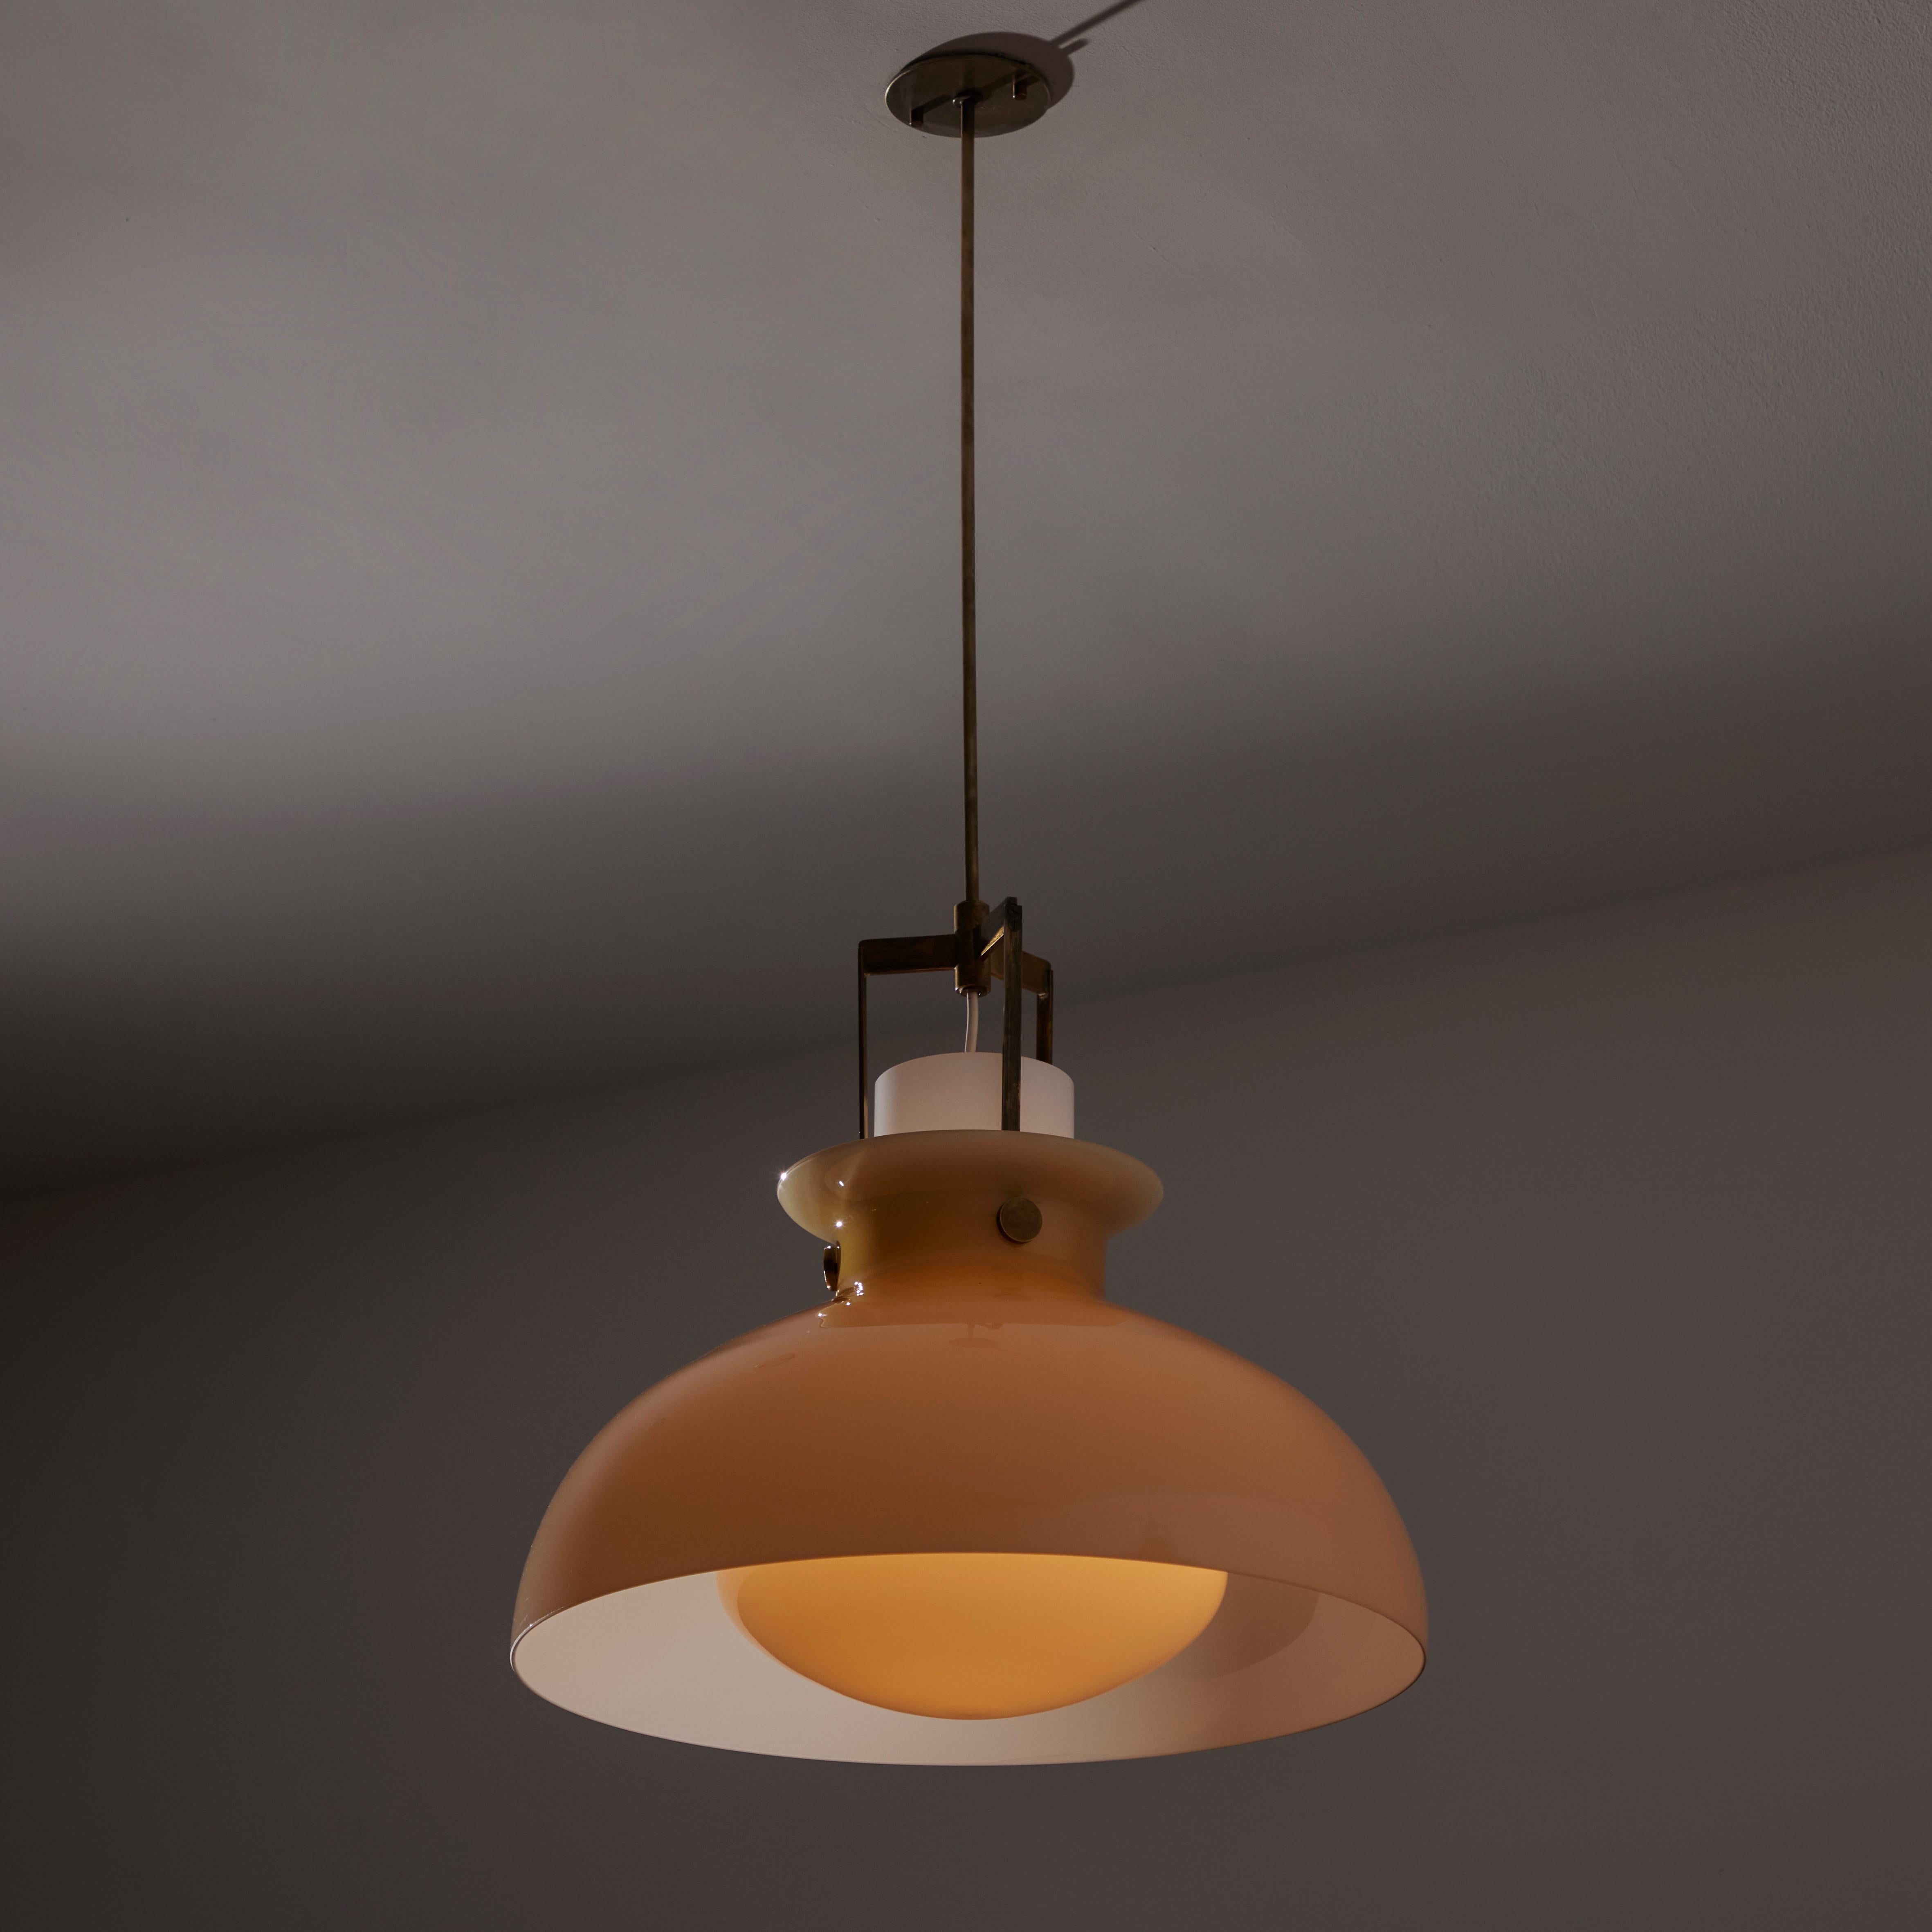 Ceiling light by Paolo Caliari for Venini. Designed and manufactured in Italy, circa the 1960s. Striking Venini pendant with an exterior mauve colored murano glass shade, encompassing an opal interior shade. The glass components are suspended by a